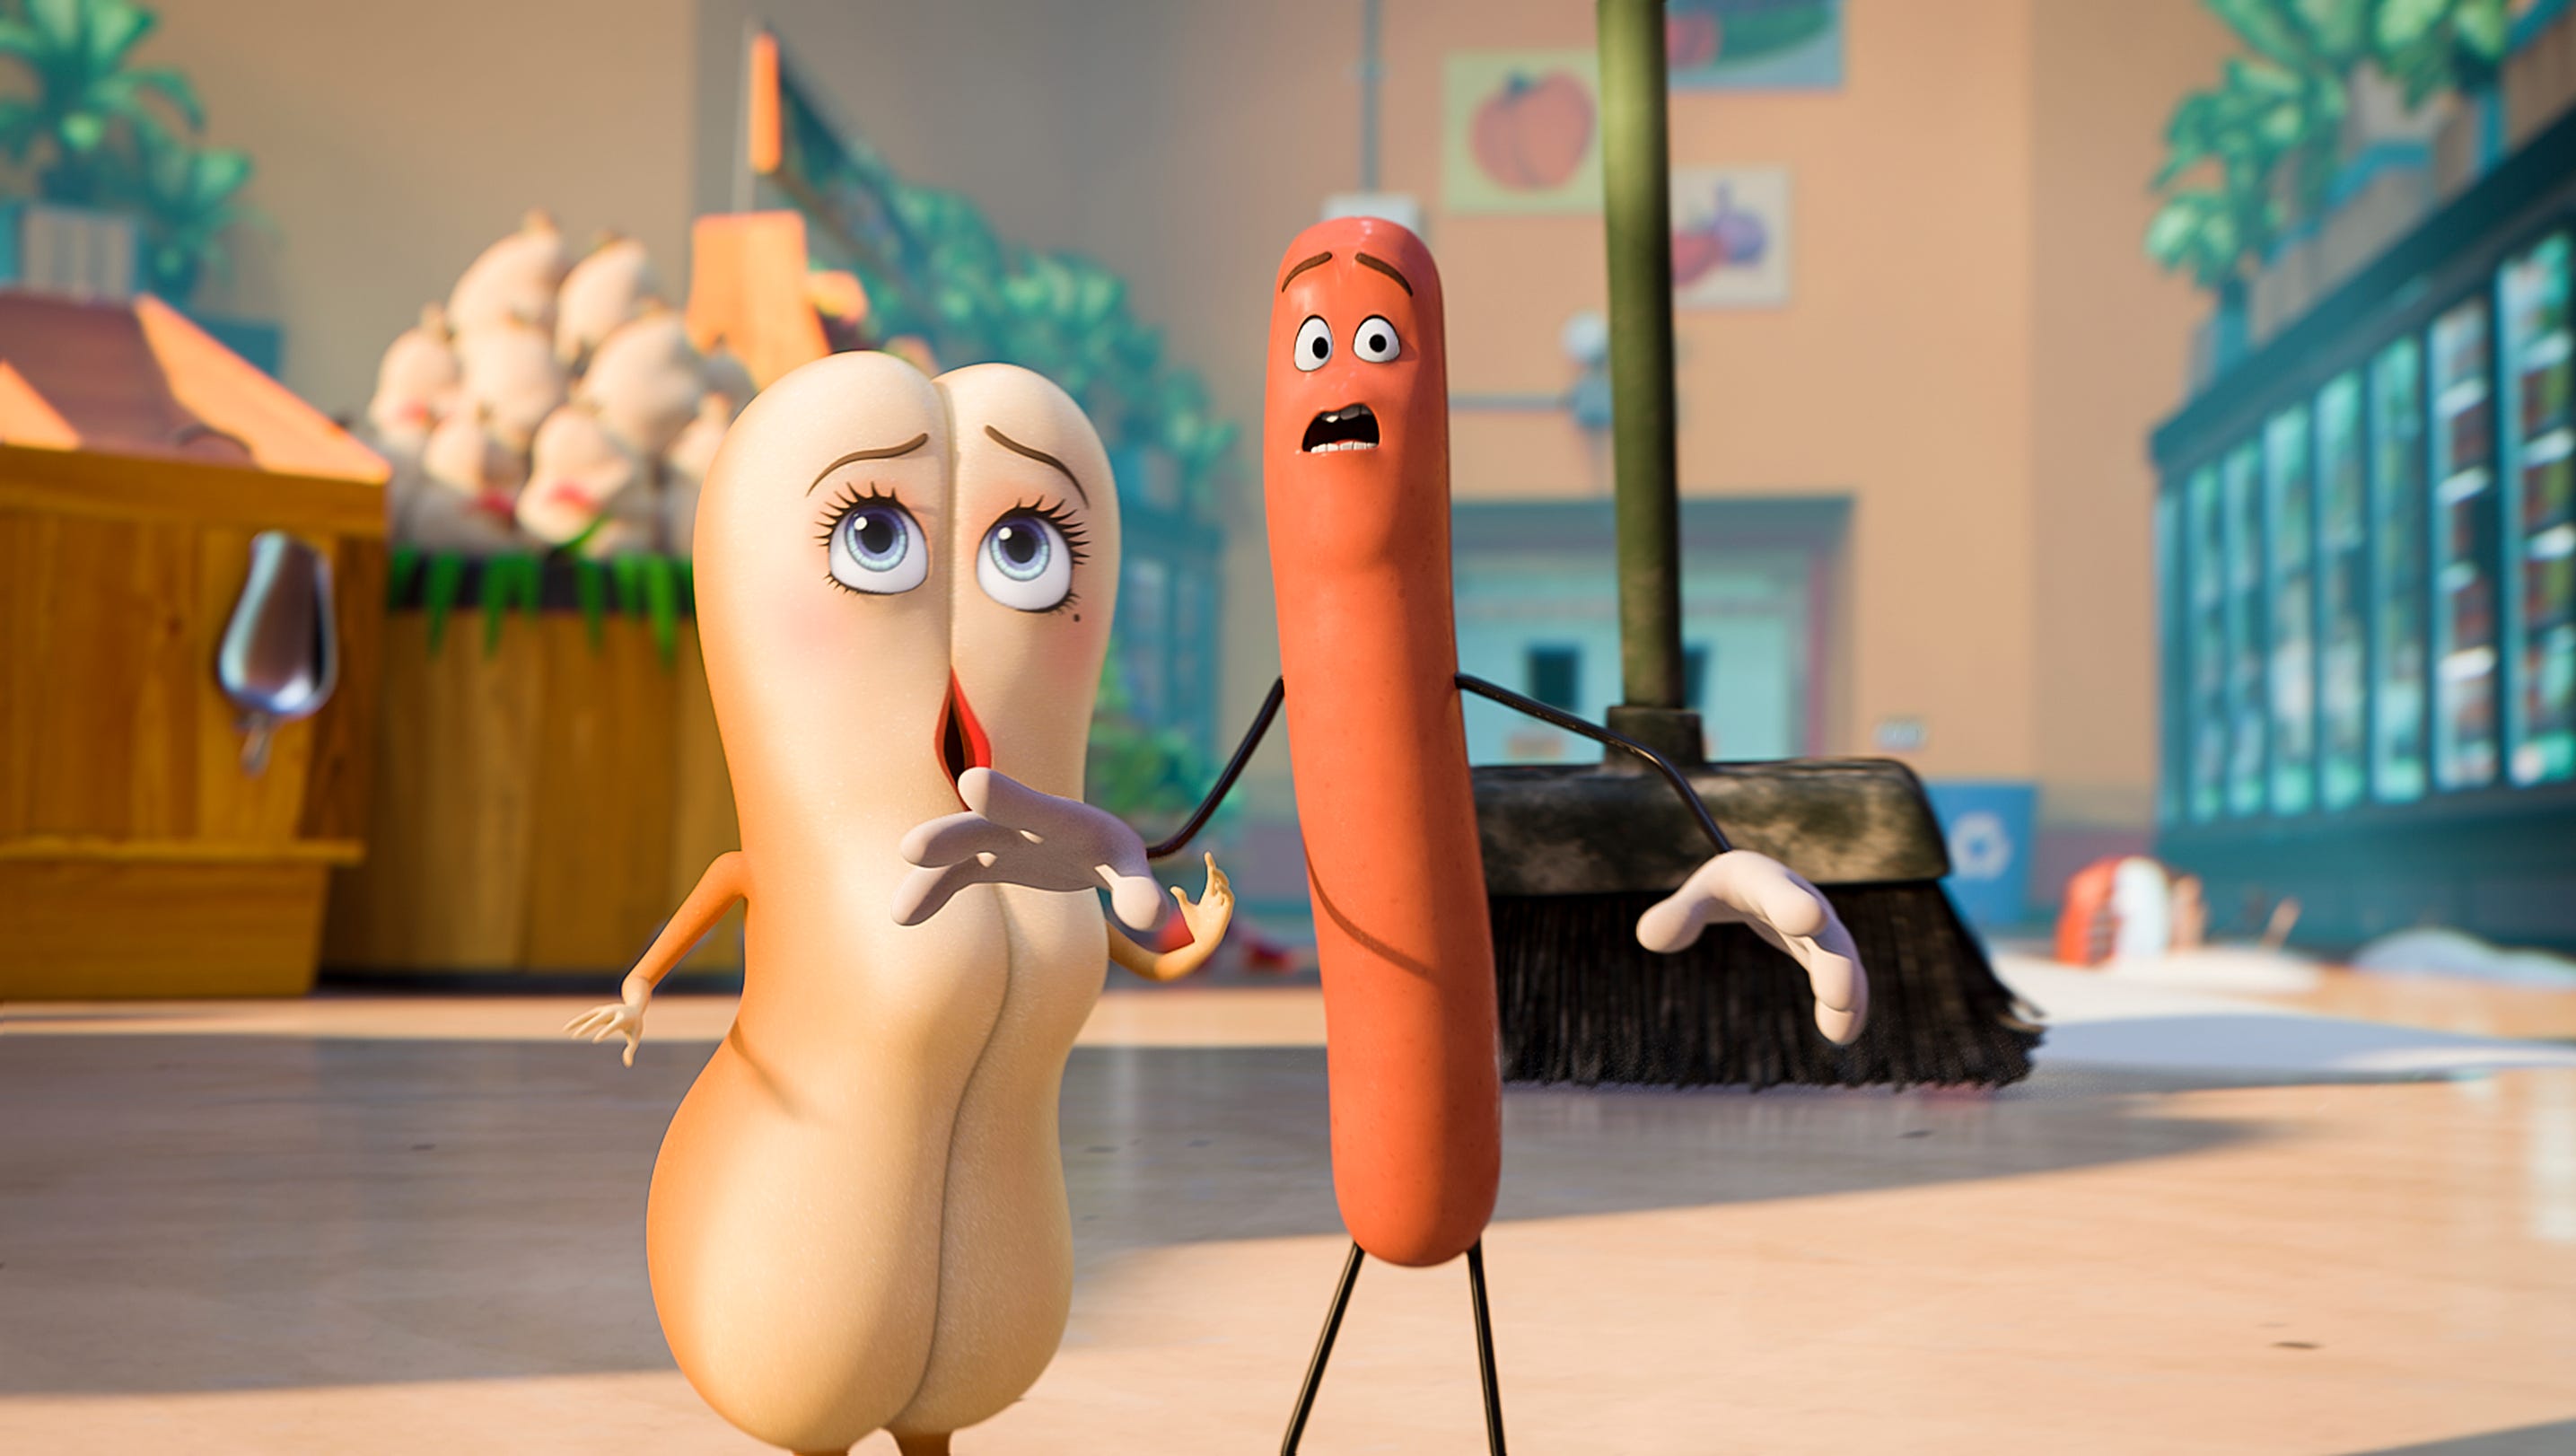 Comedy Porn Cartoon - Review: Crude food comes to life in smart 'Sausage Party'